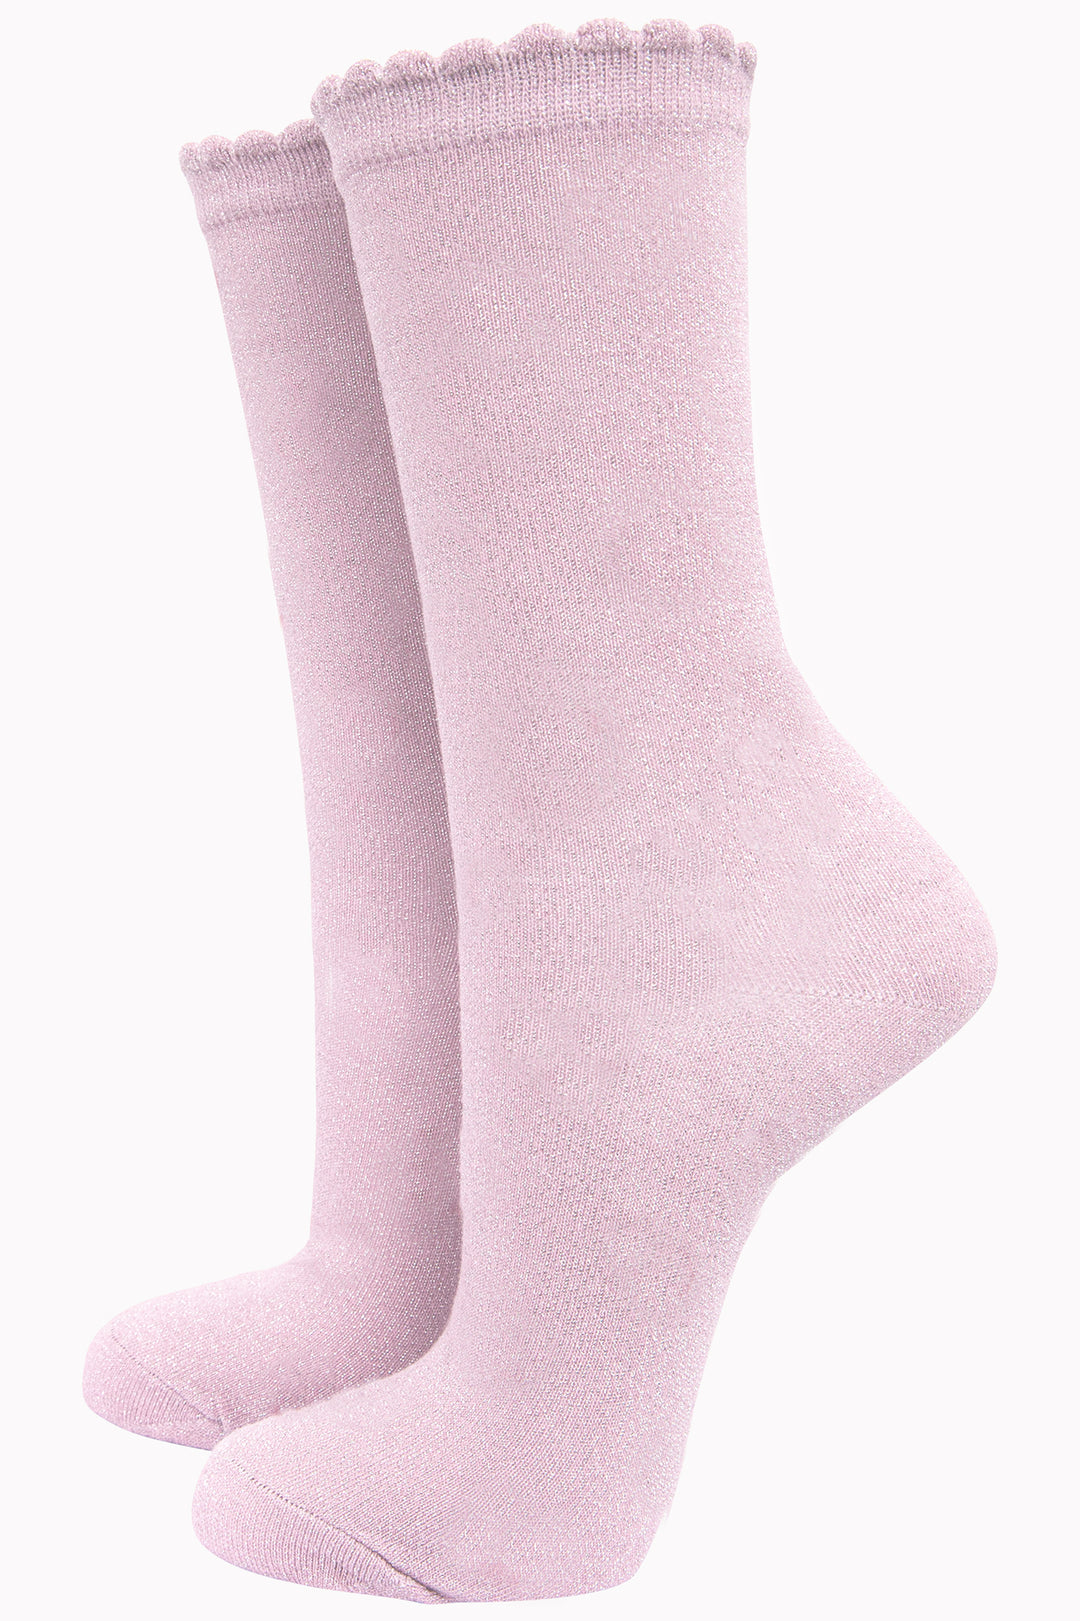 Womens Glitter Socks Pink Sparkly Ankle Socks Shimmer With Scalloped Cuff